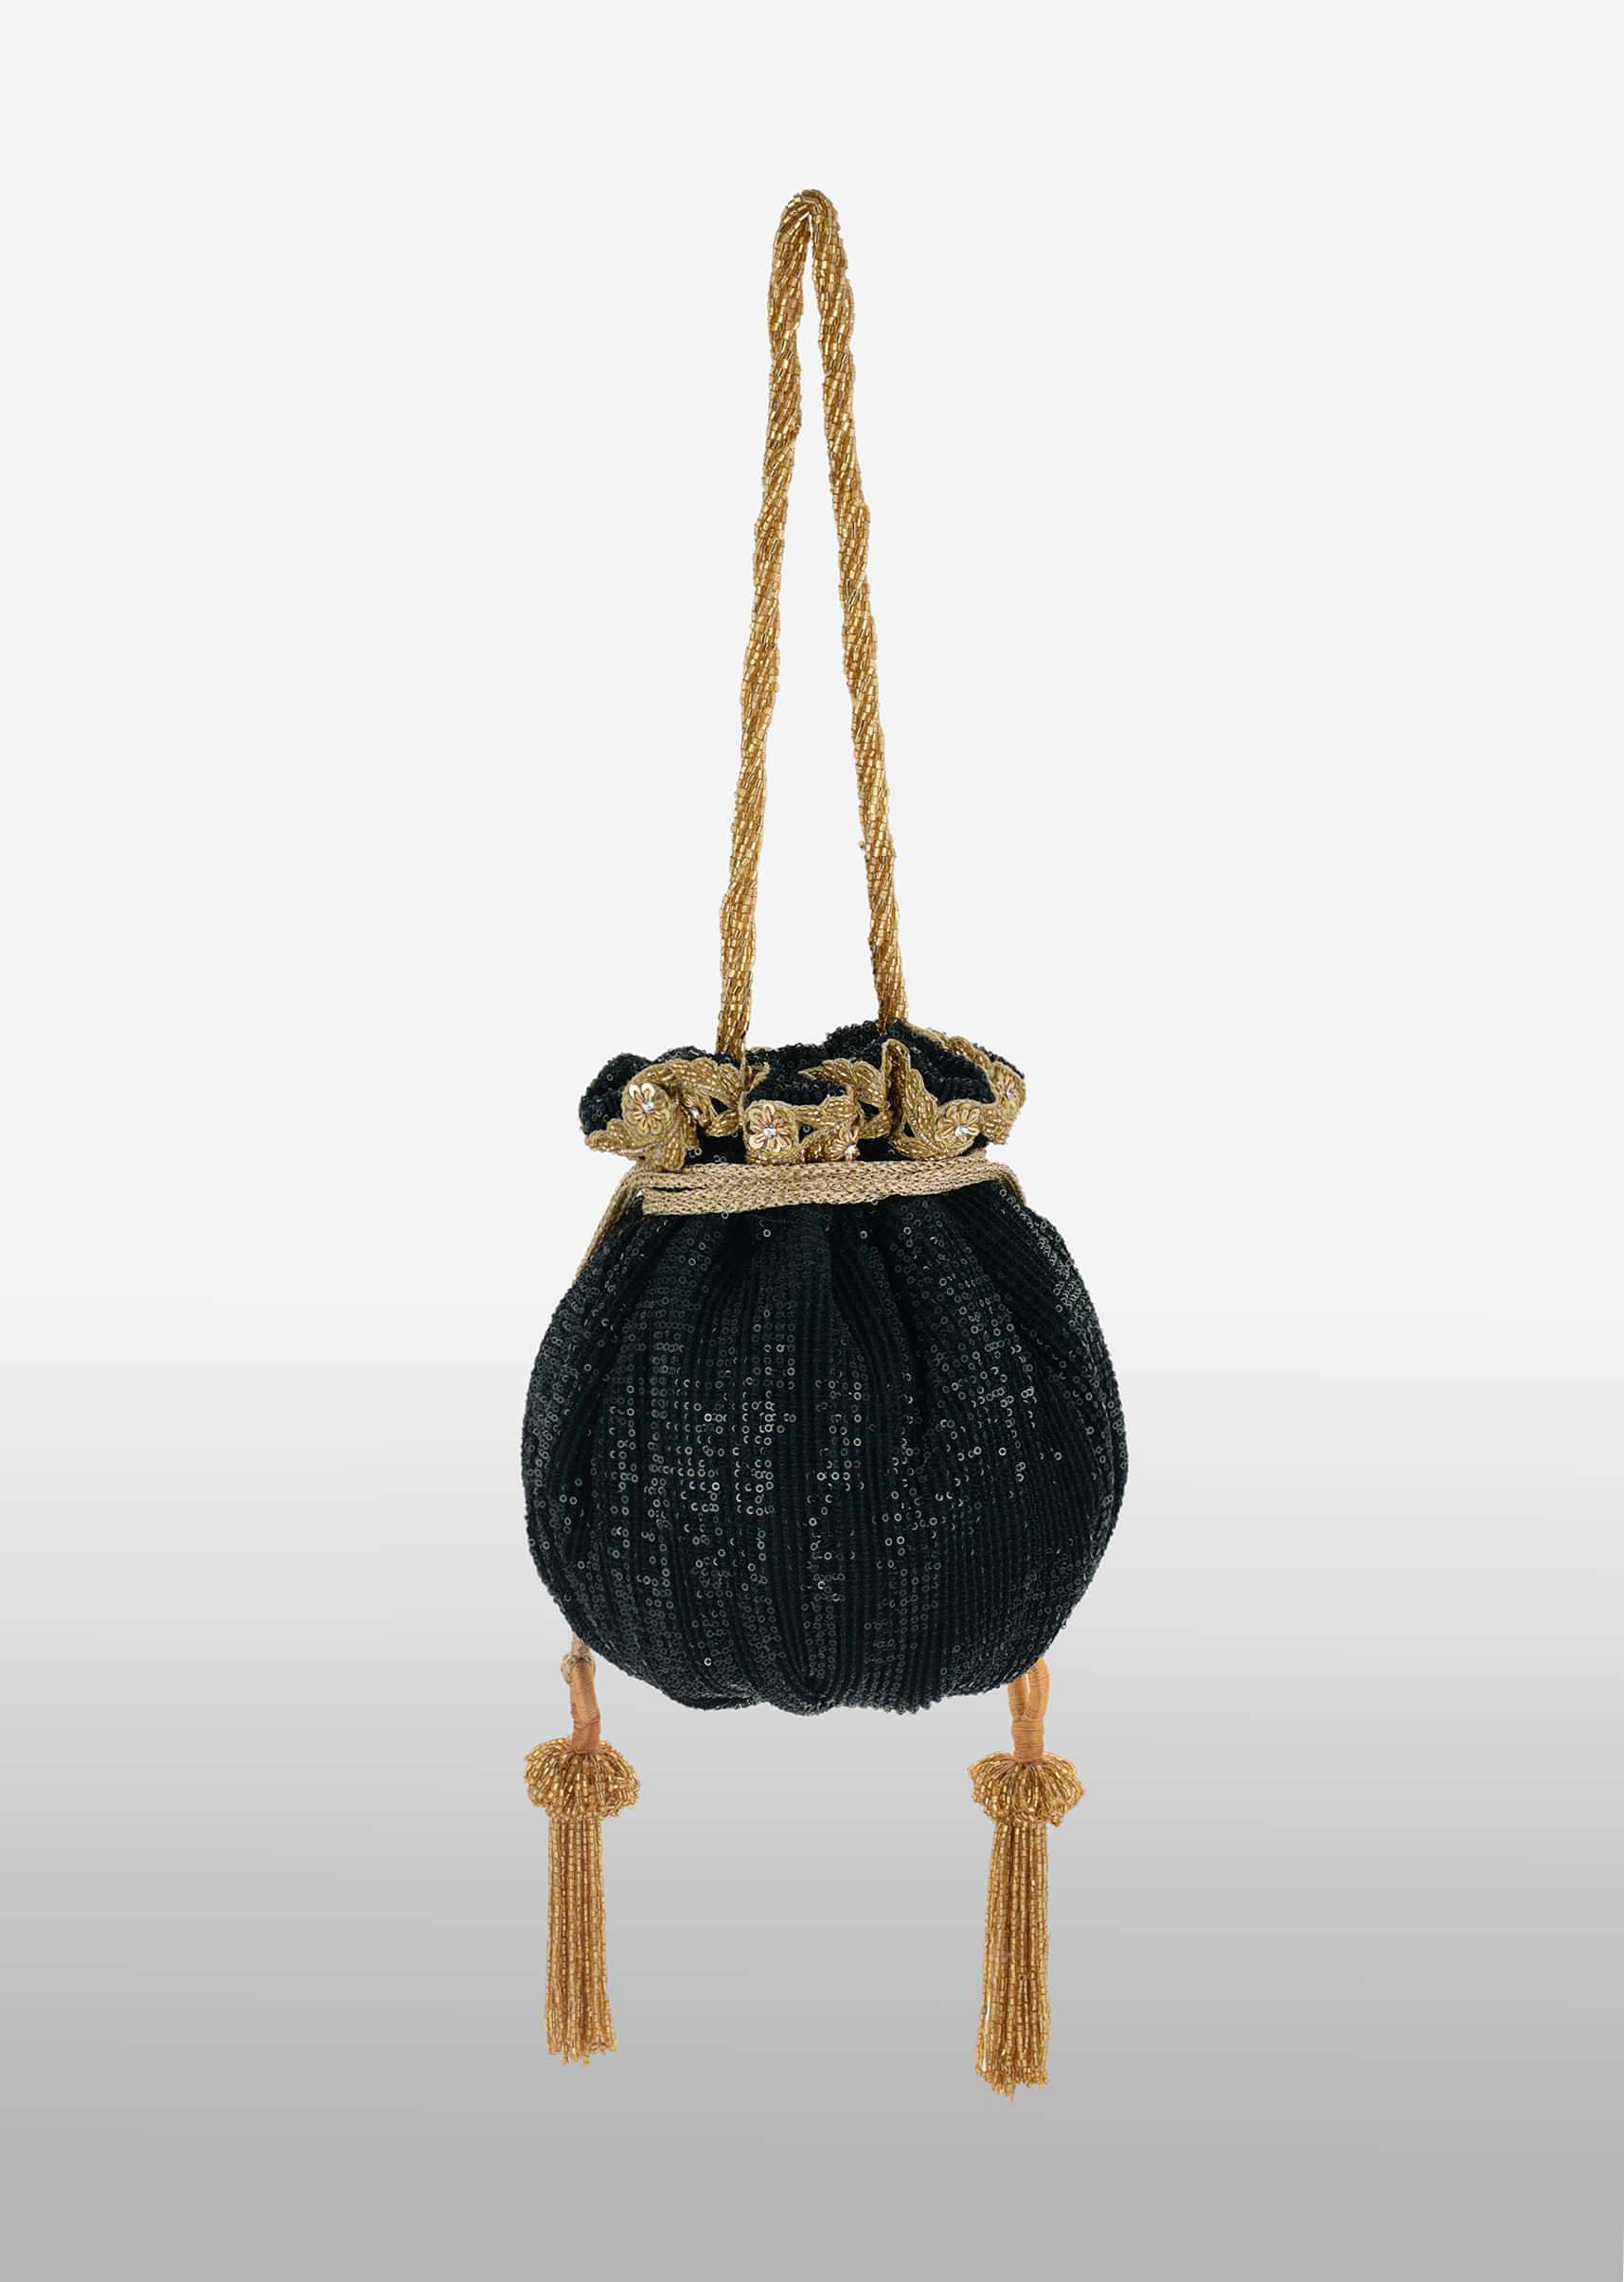 Jewel Green Potli Bag In Crushed Sequins Fabric With Cut Dana And Zardosi Embroidery Detailing Online - Kalki Fashion